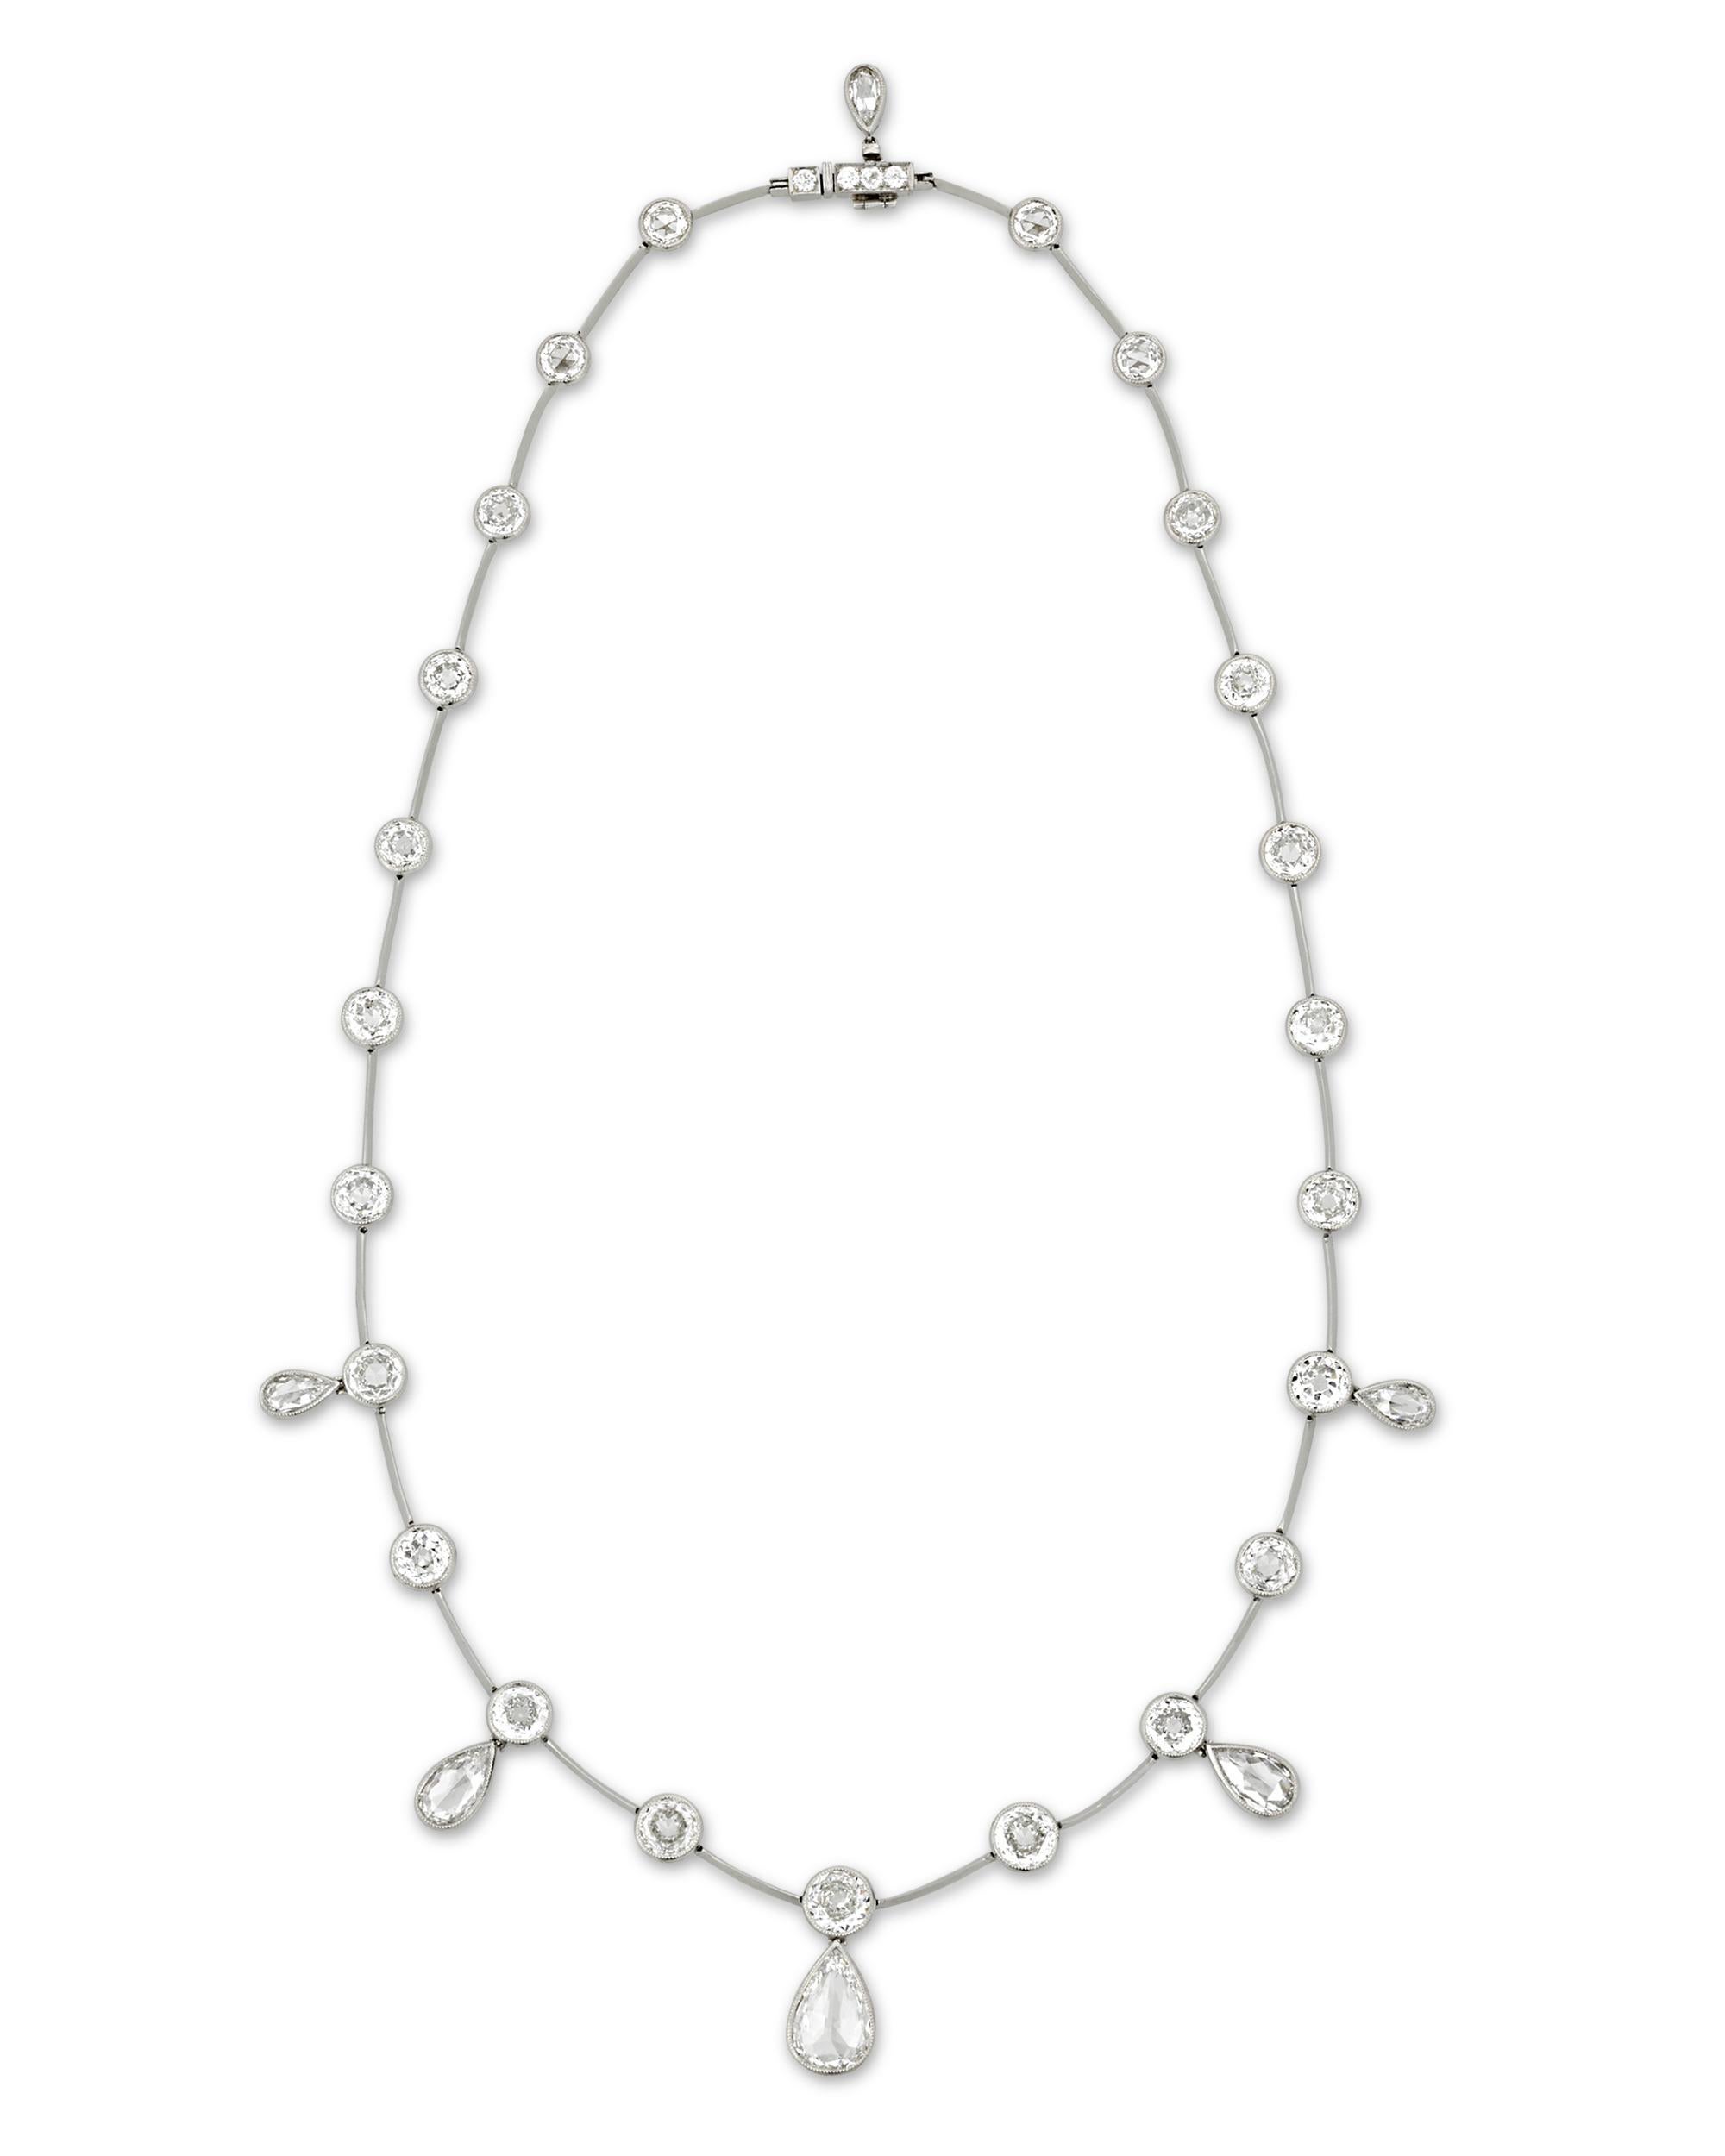 This sensational necklace showcases a design illuminated by a marvelous array of rose-cut diamonds weighing a total of 14.73 carats. Six pear-shaped white diamonds dangle from a sleek chain lined with bezel-set round diamonds. Set in platinum and